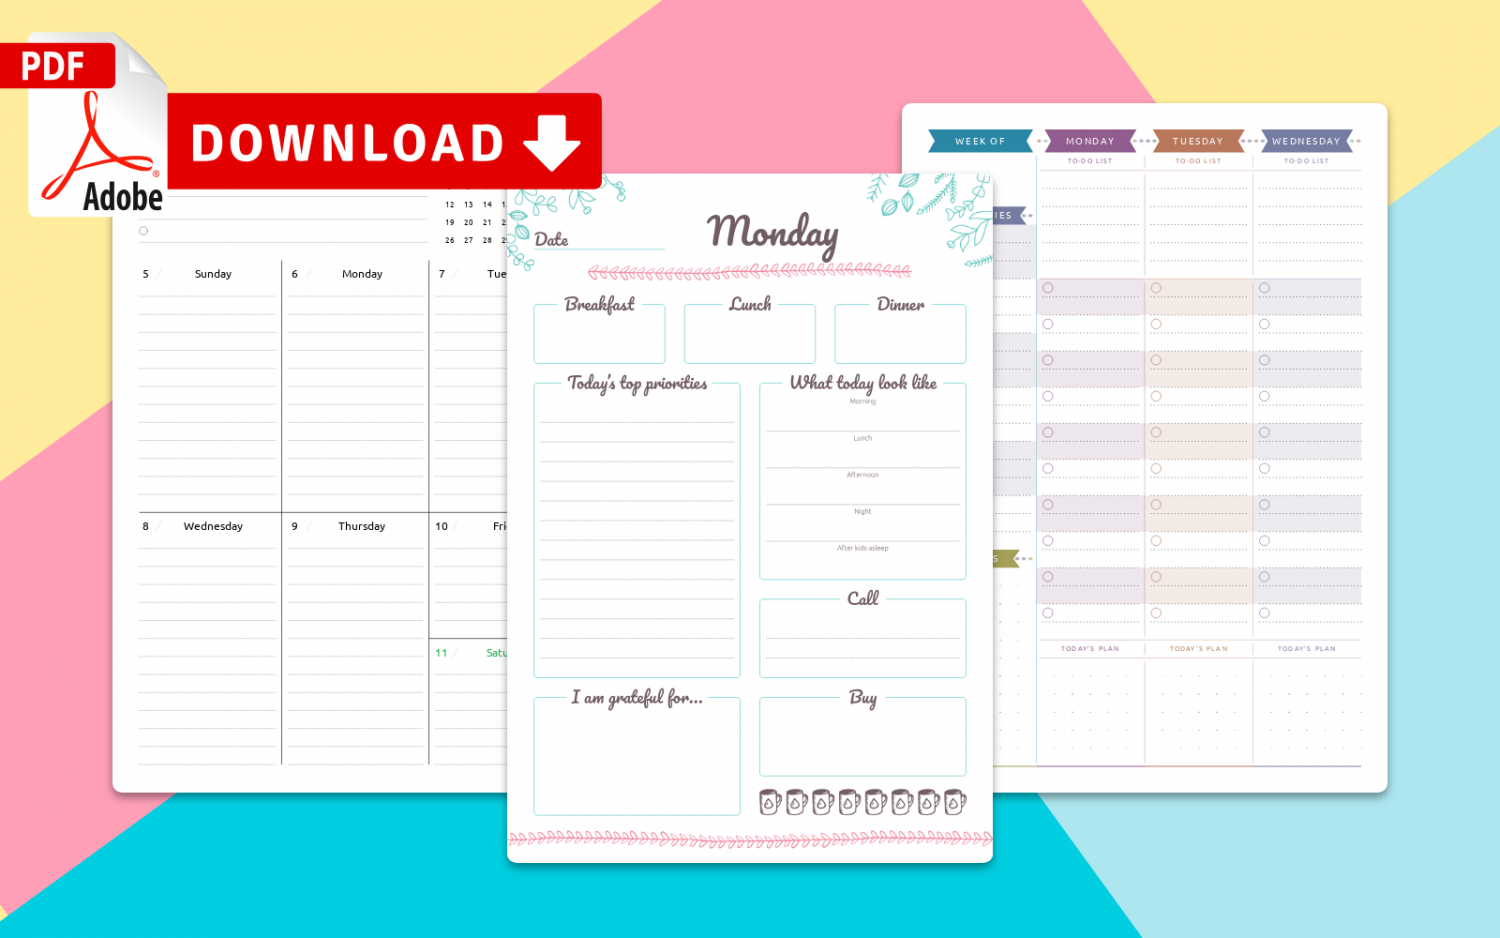 Download and Print Weekly Calendar